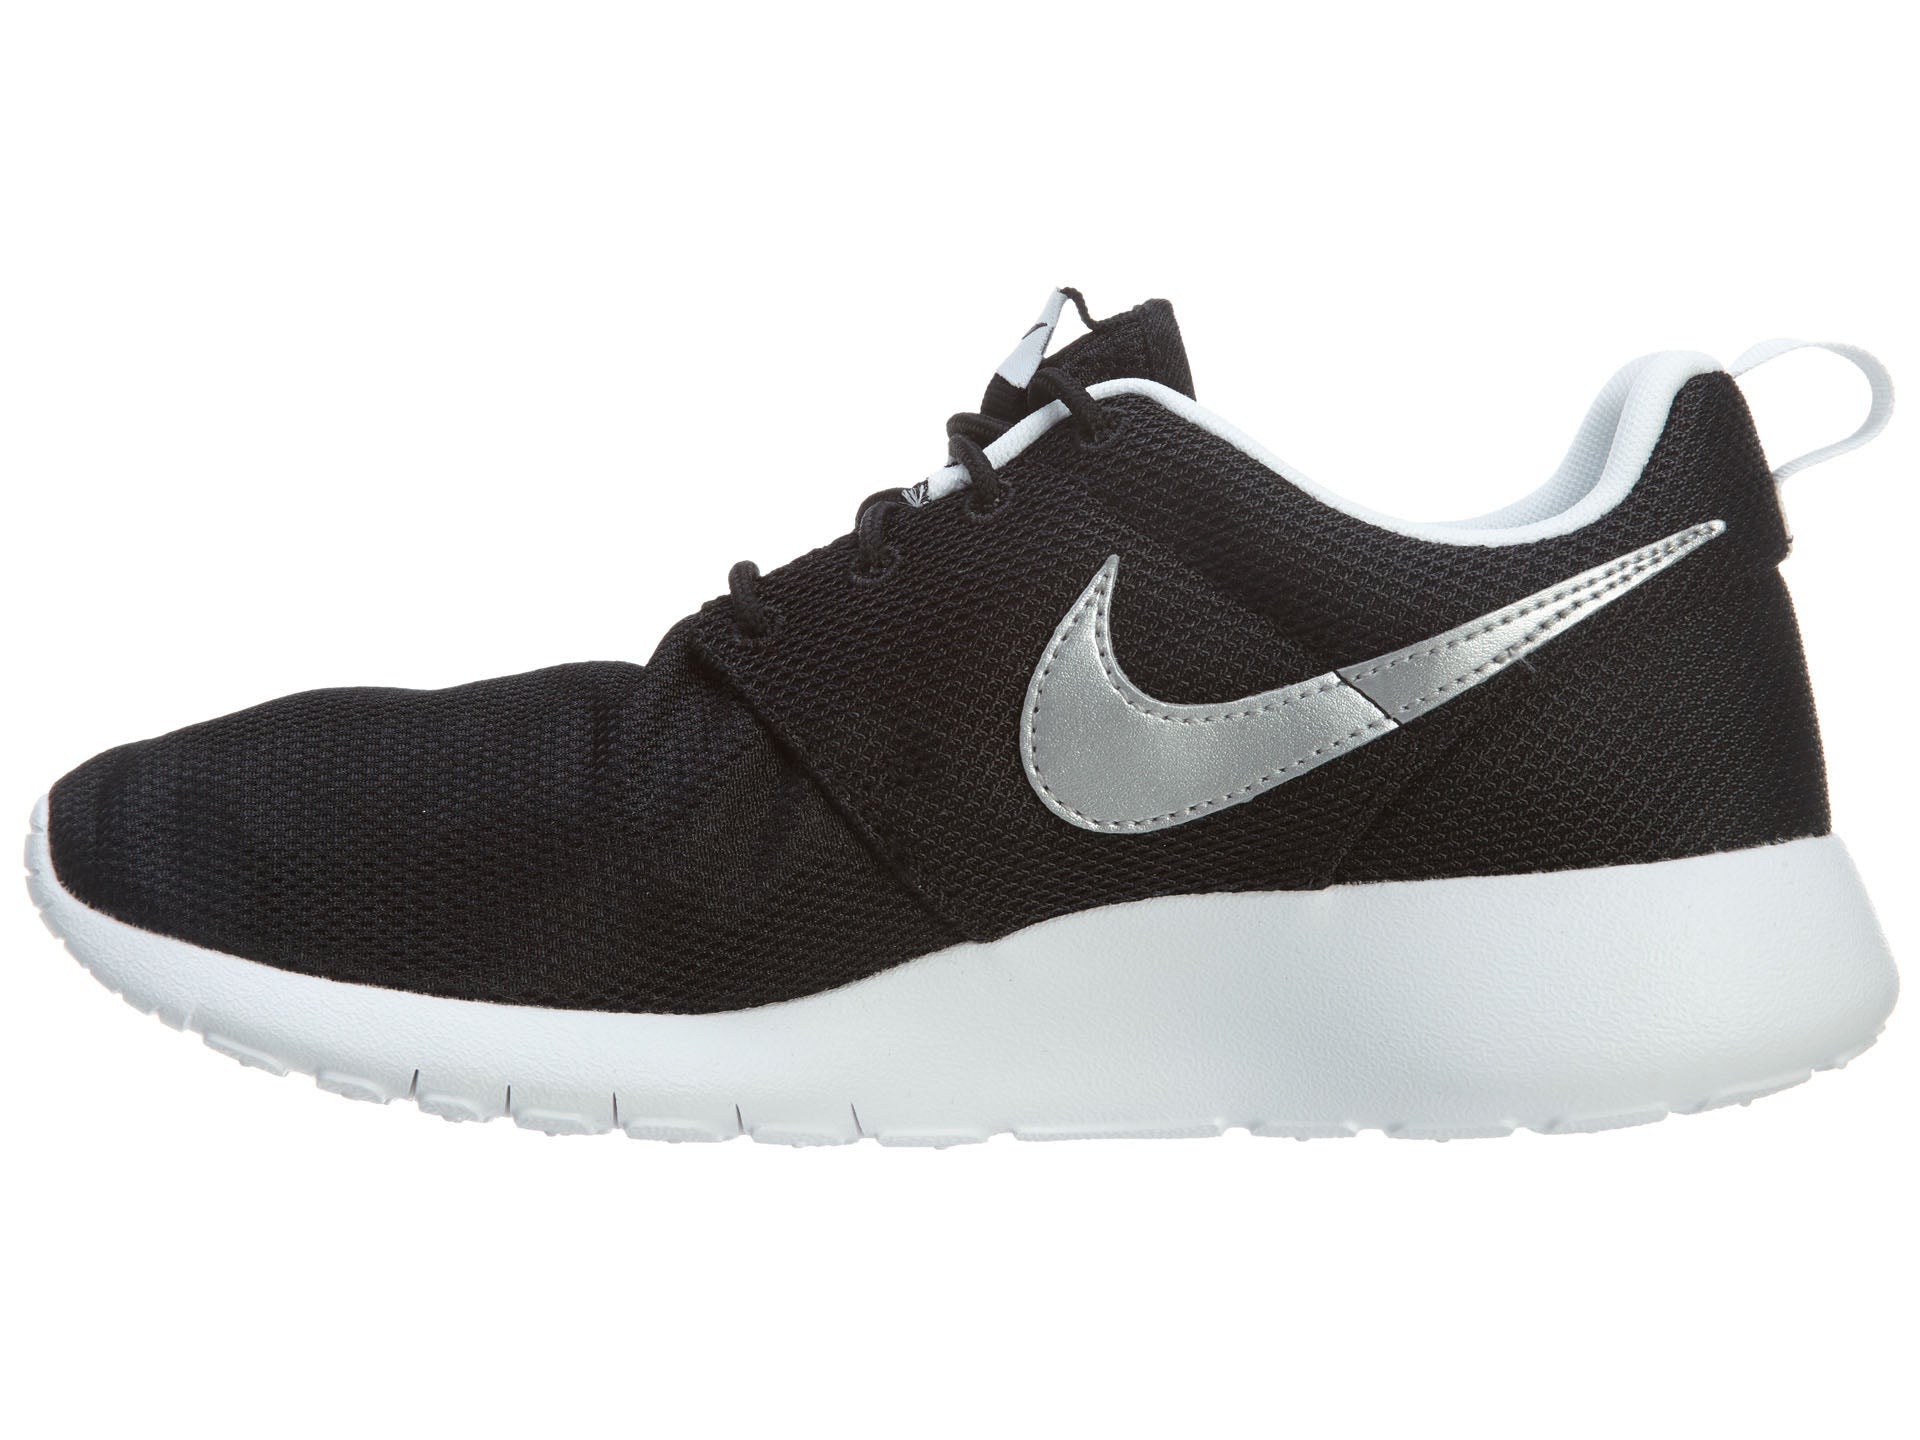 Nike Air Roshe One Shoes Boys / Girls Style :599728